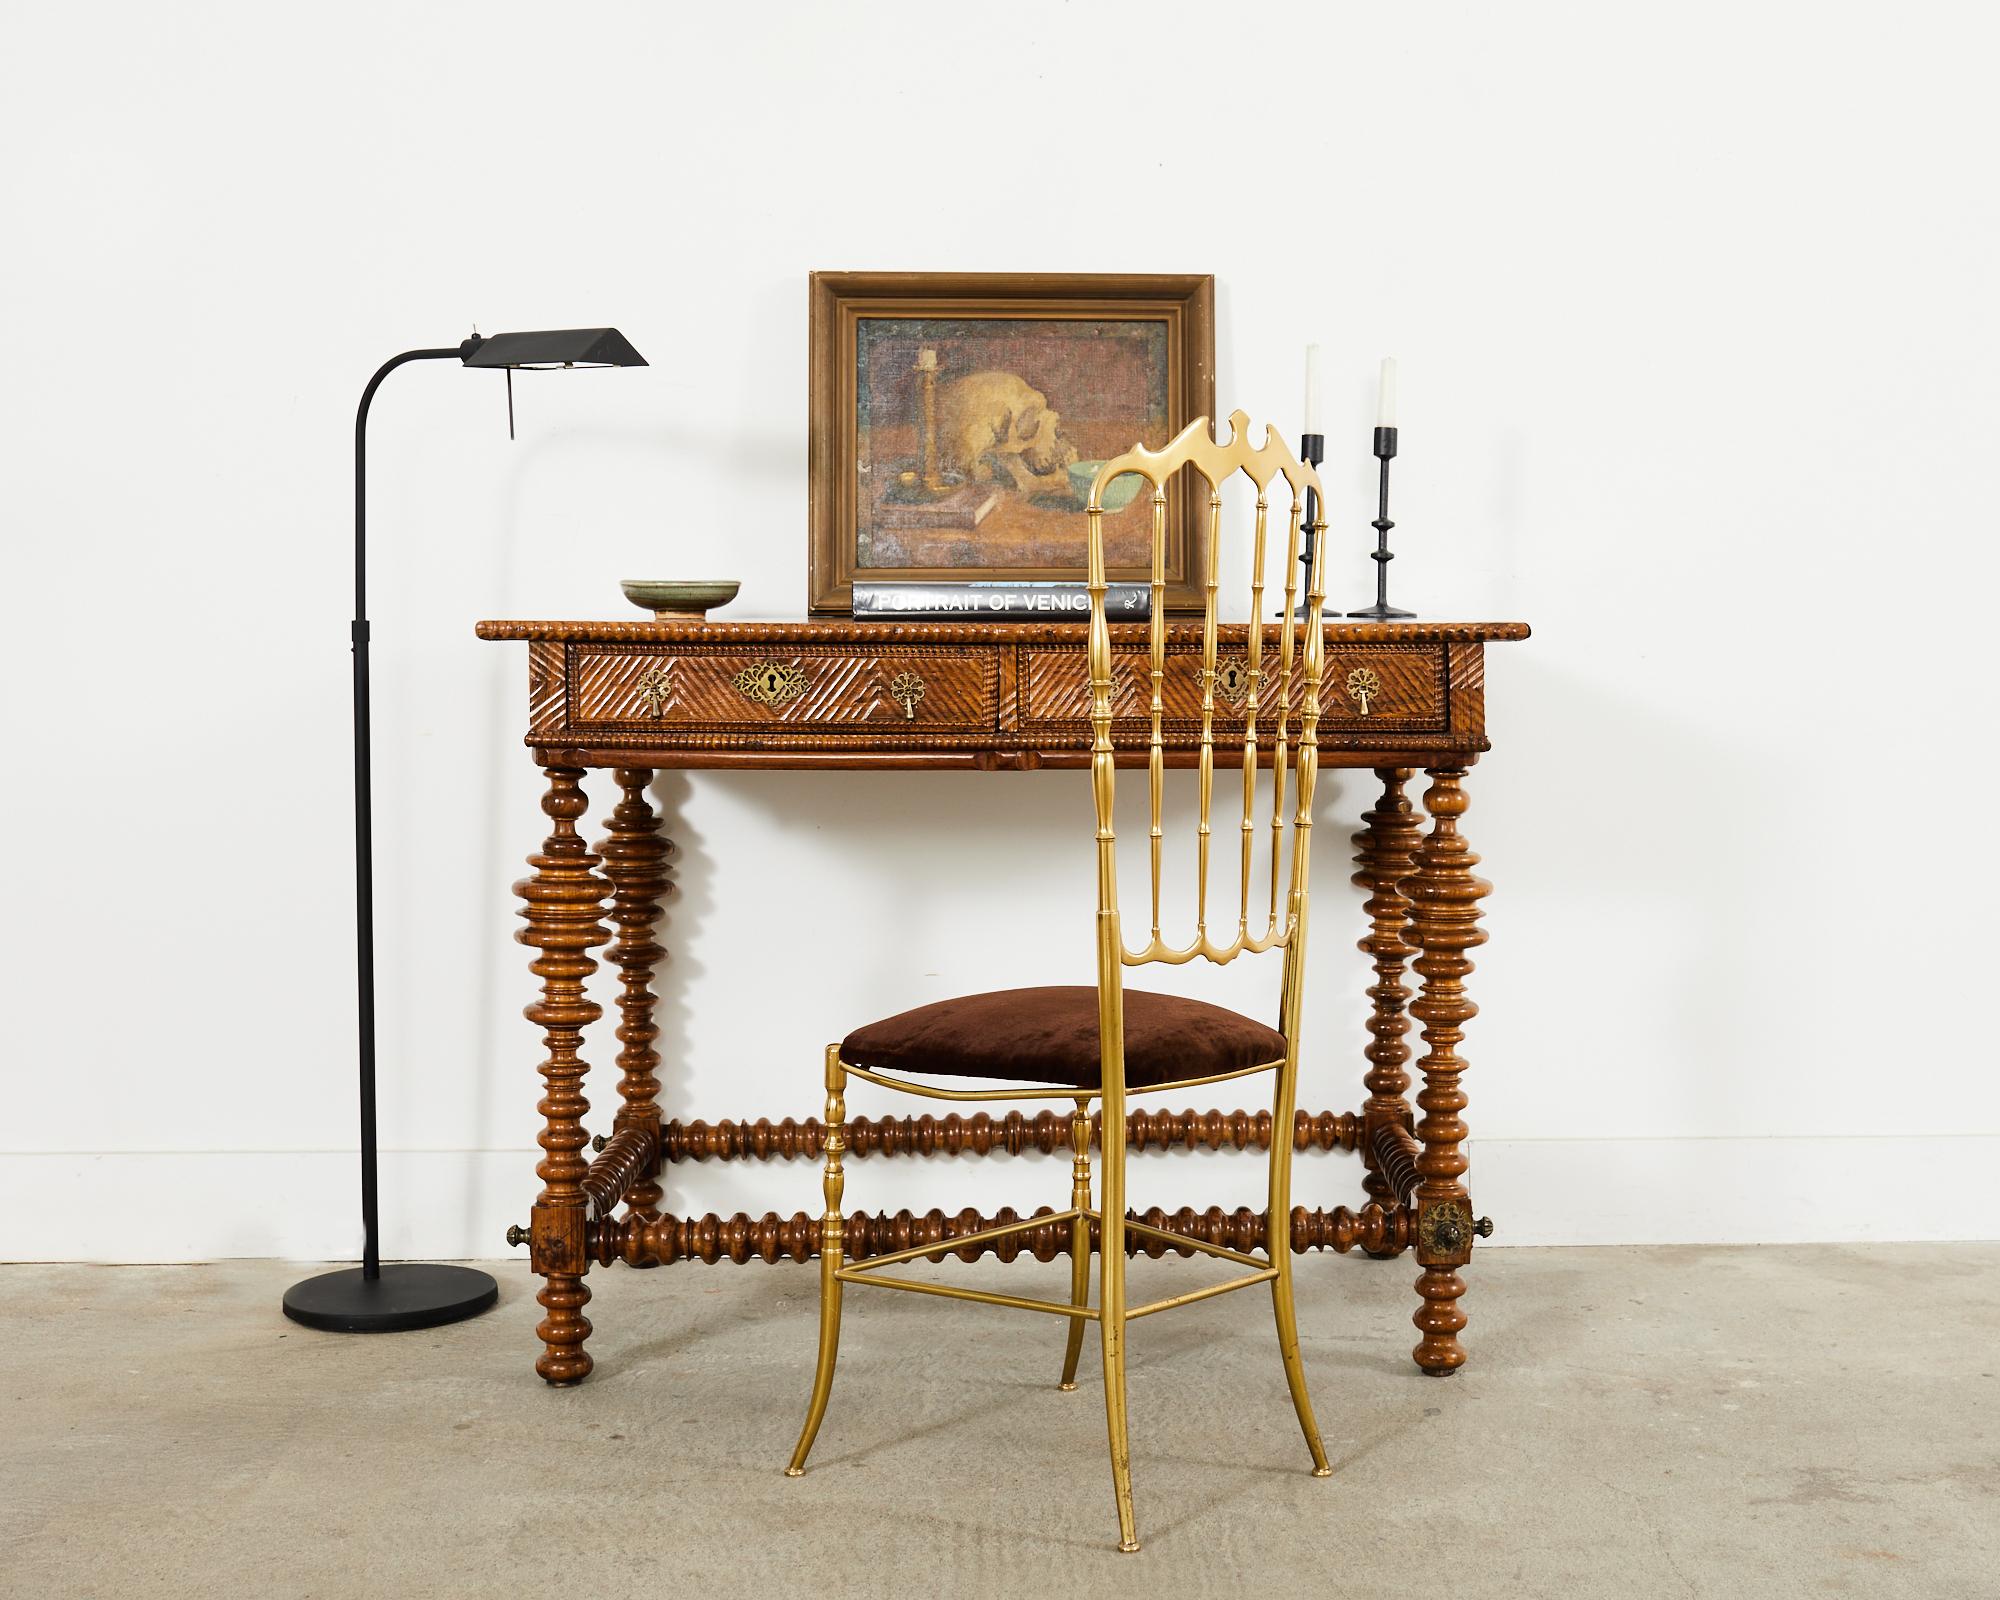 Extraordinary late 17th century baroque period Portuguese library table, center table, or writing table crafted from radiant Brazilian Rosewood. The mesa bufete has a rectangular top with a decorative gadrooned edge. The desk is fronted by two